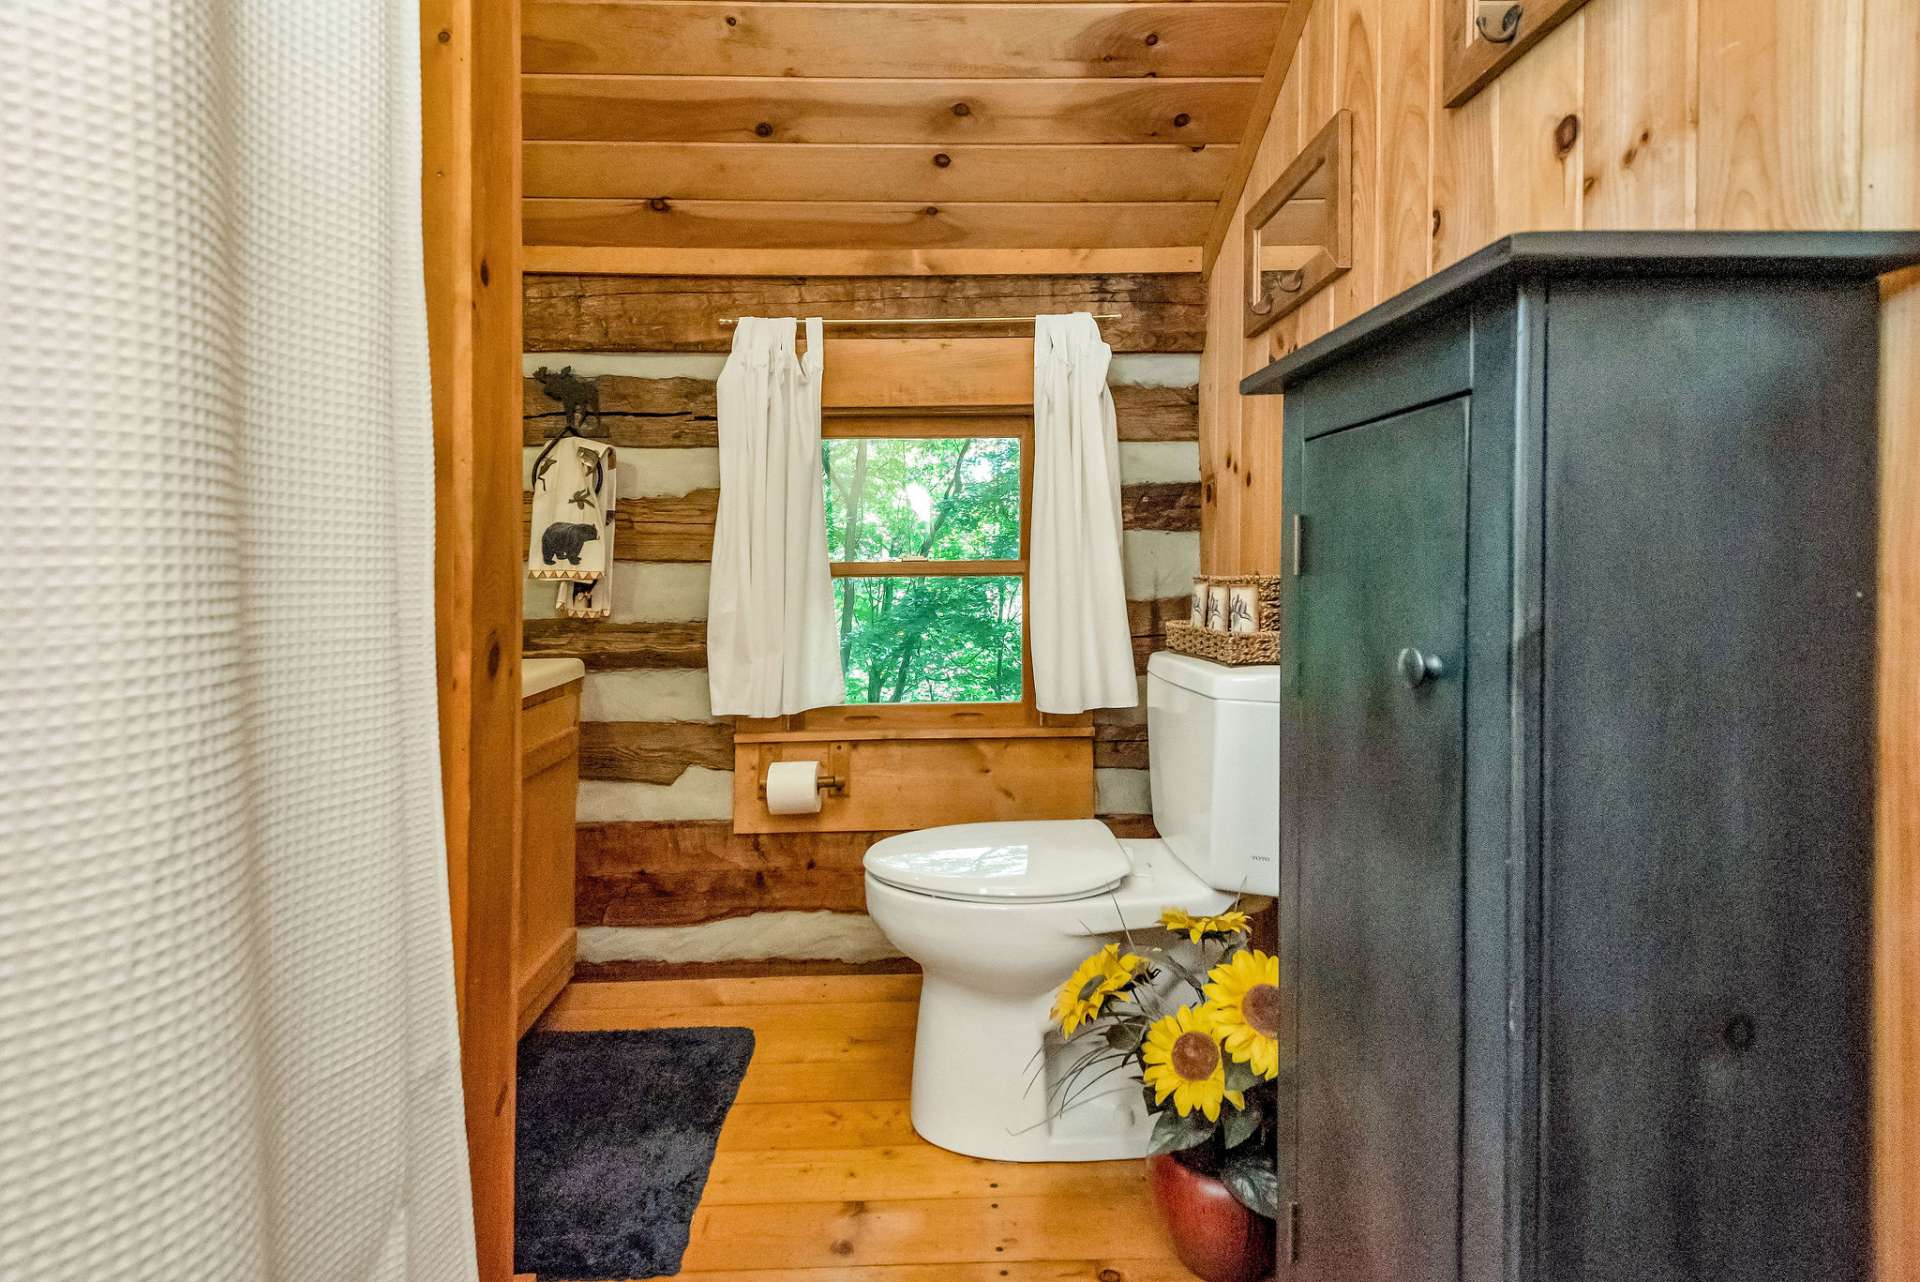 Guests will enjoy the private loft bath.